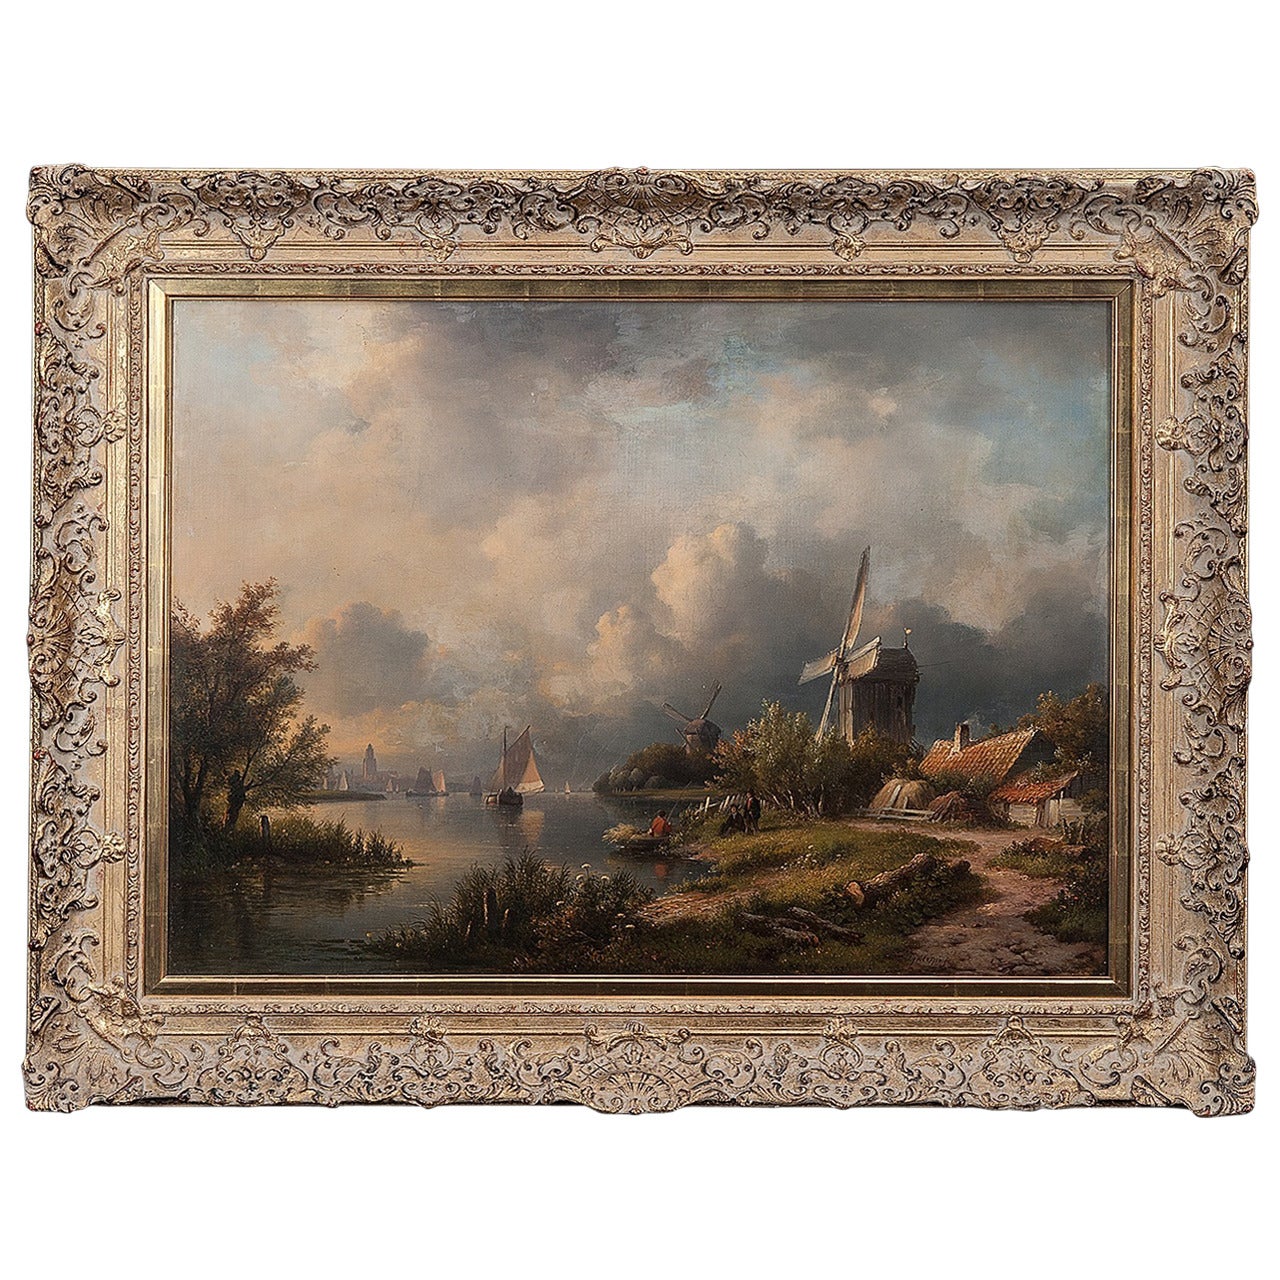 Painting of a Village by River For Sale